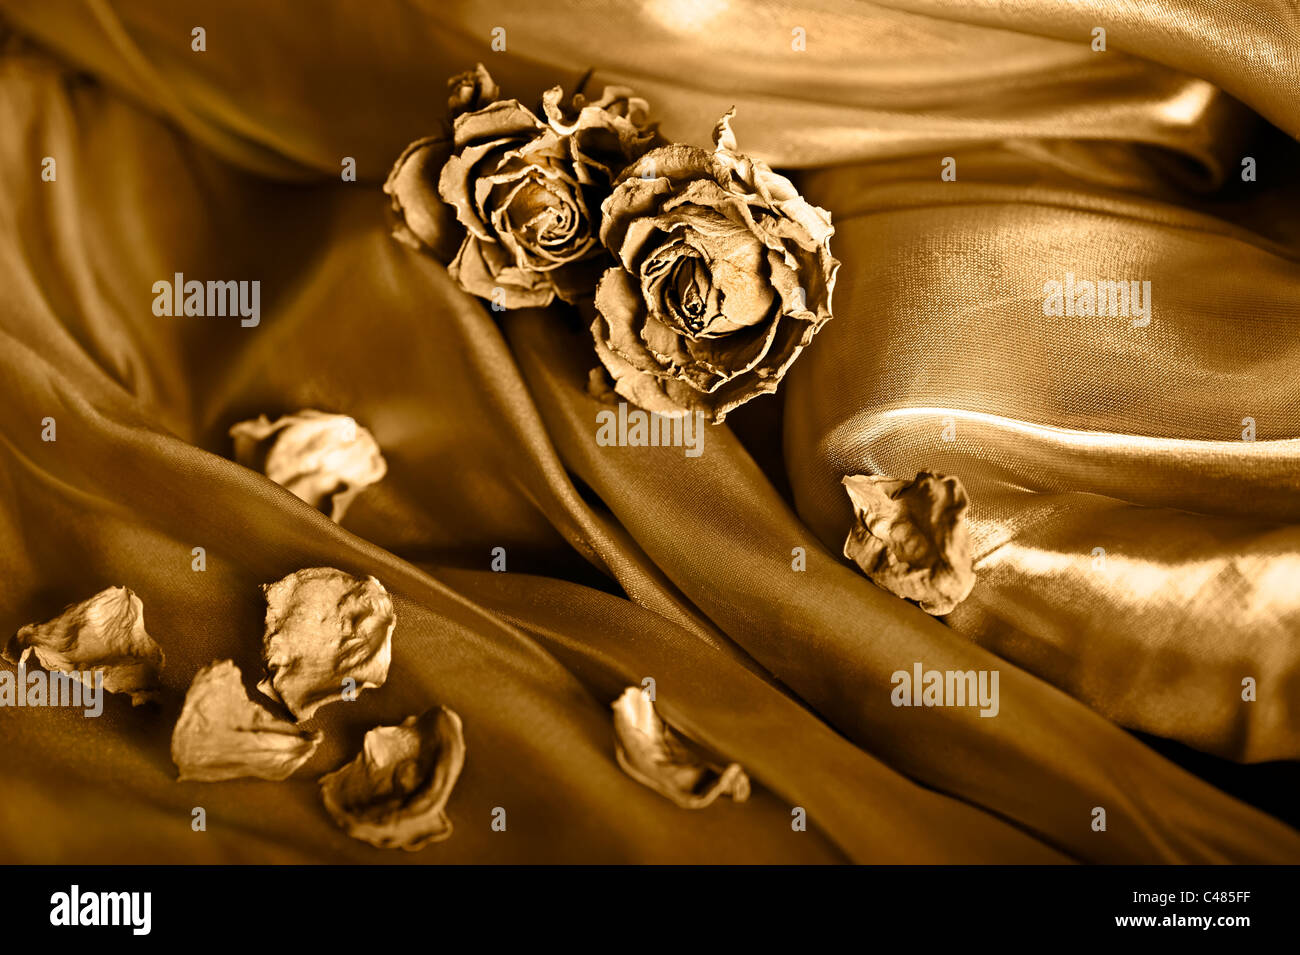 Vintage background: Dry rose on satin. Gold colored image, shallow depth of field Stock Photo